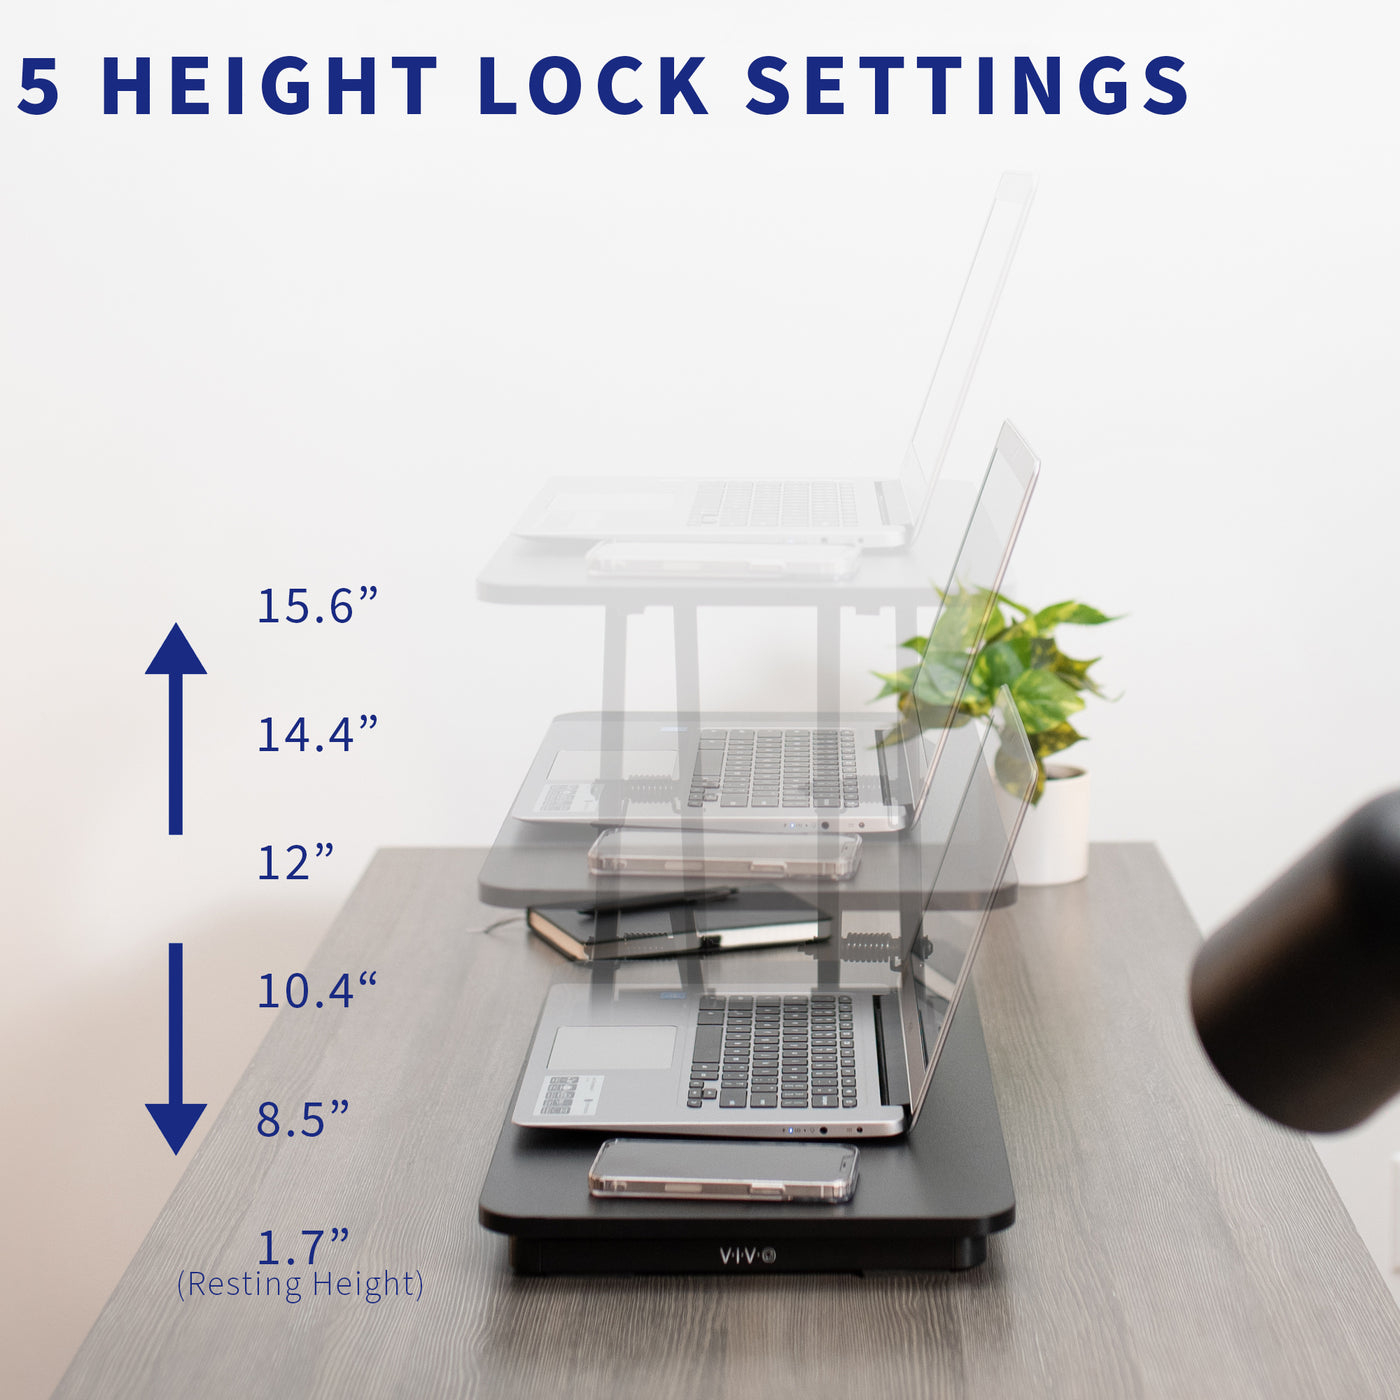 With several lock-in height adjustment settings, securely elevate your keyboard and mouse, laptop, or other devices to new heights.